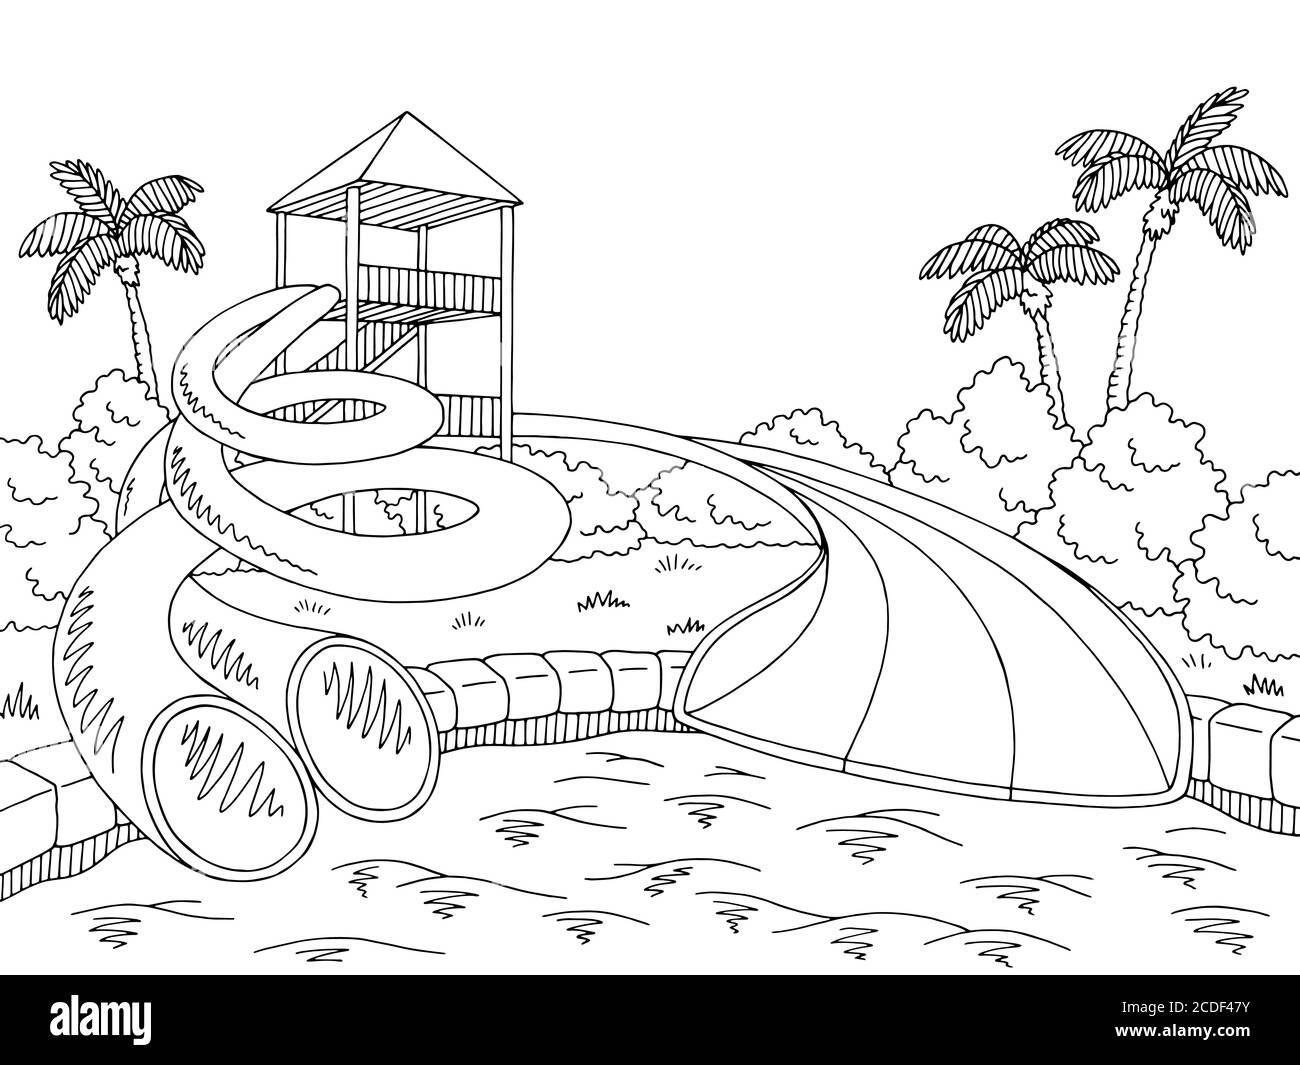 How to draw a Waterpark Playground step by step  YouTube